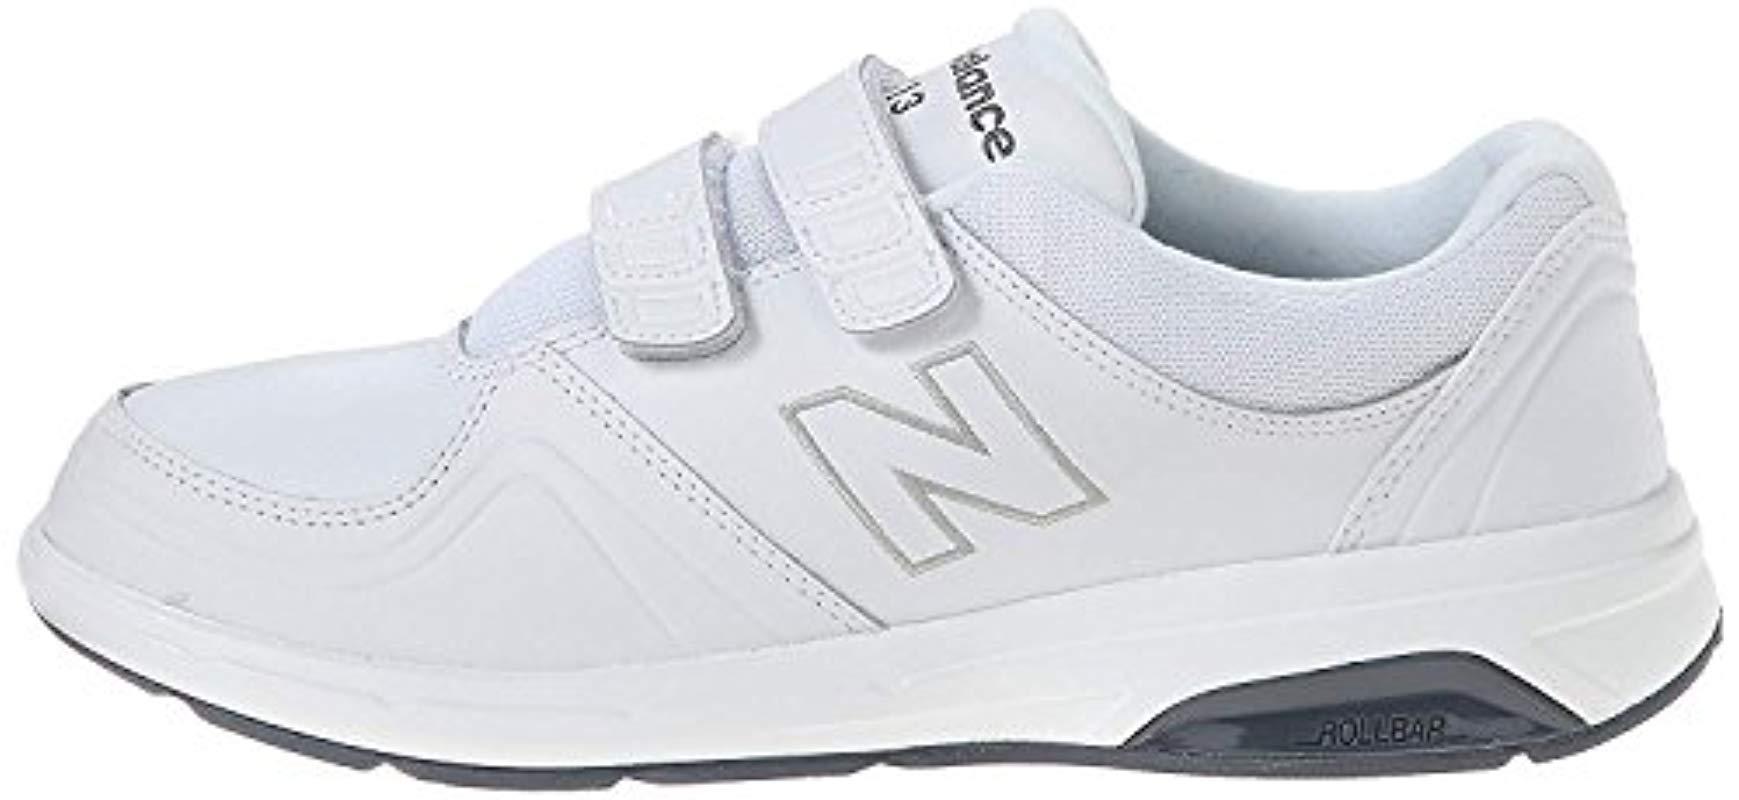 Lyst - New Balance Ww813 Hook And Loop Walking Shoe, White, 7 B Us in ...